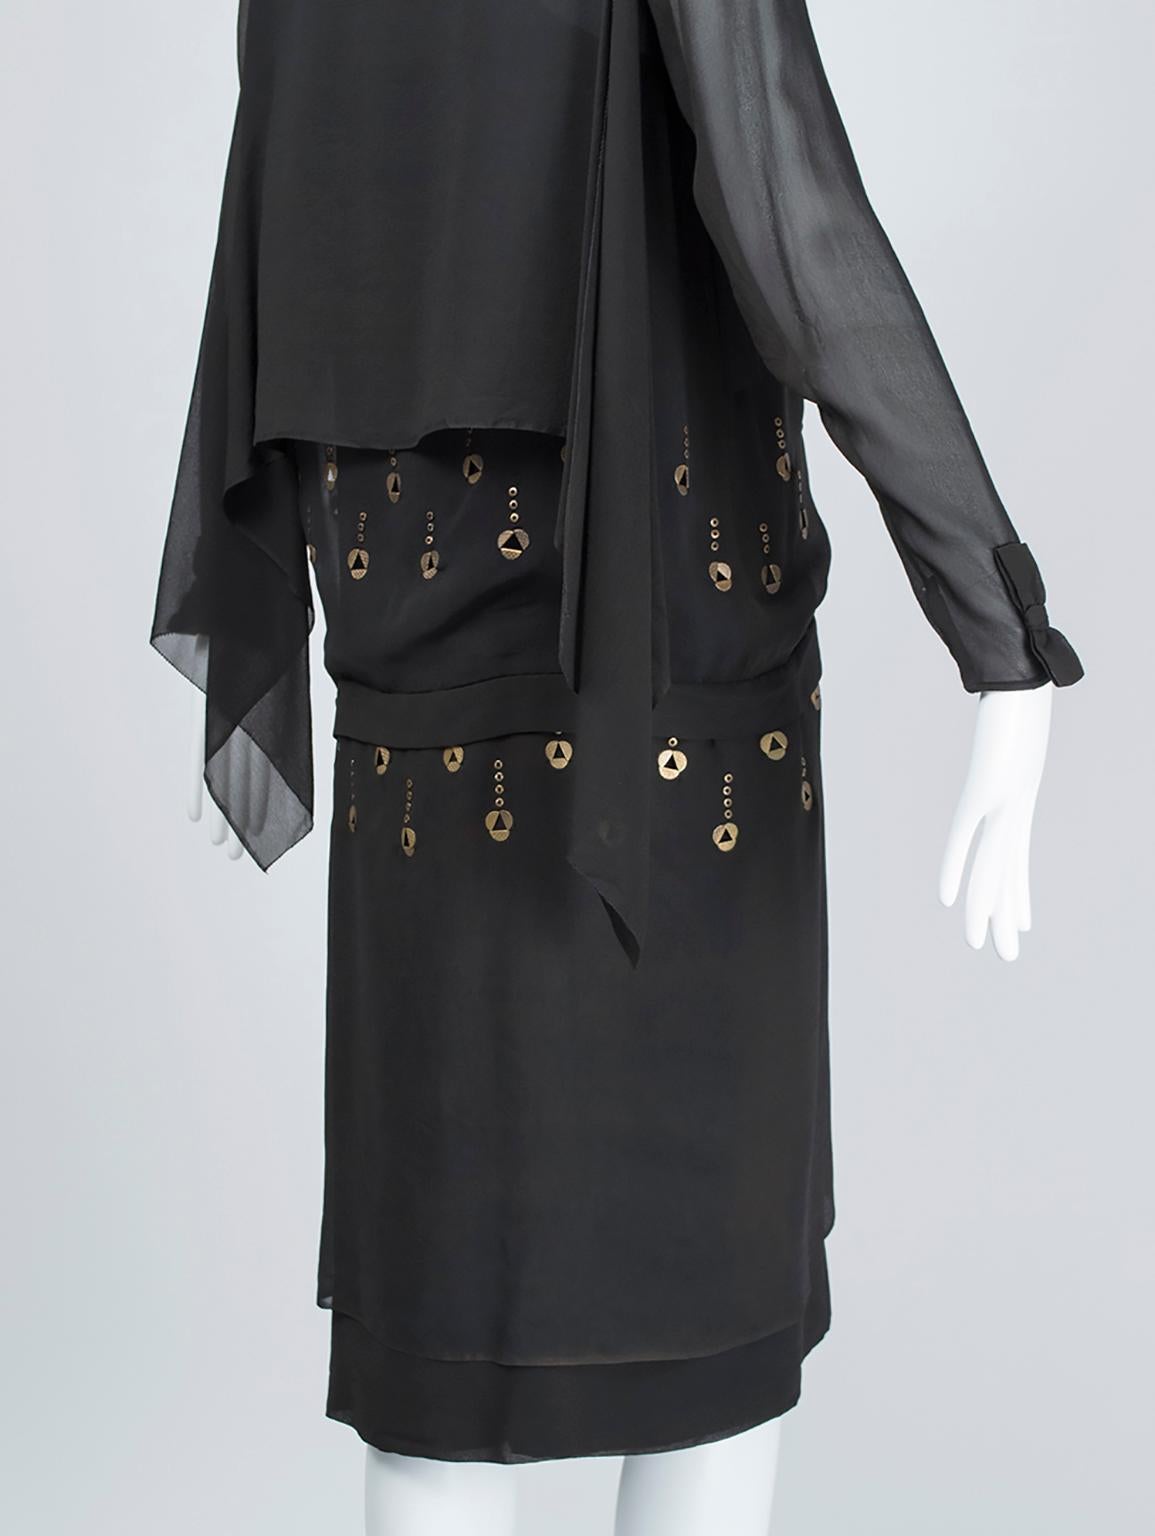 Women's Black Egyptian Revival Deco Blouson Dress with Punched Brass Eyelets - S, 1924 For Sale